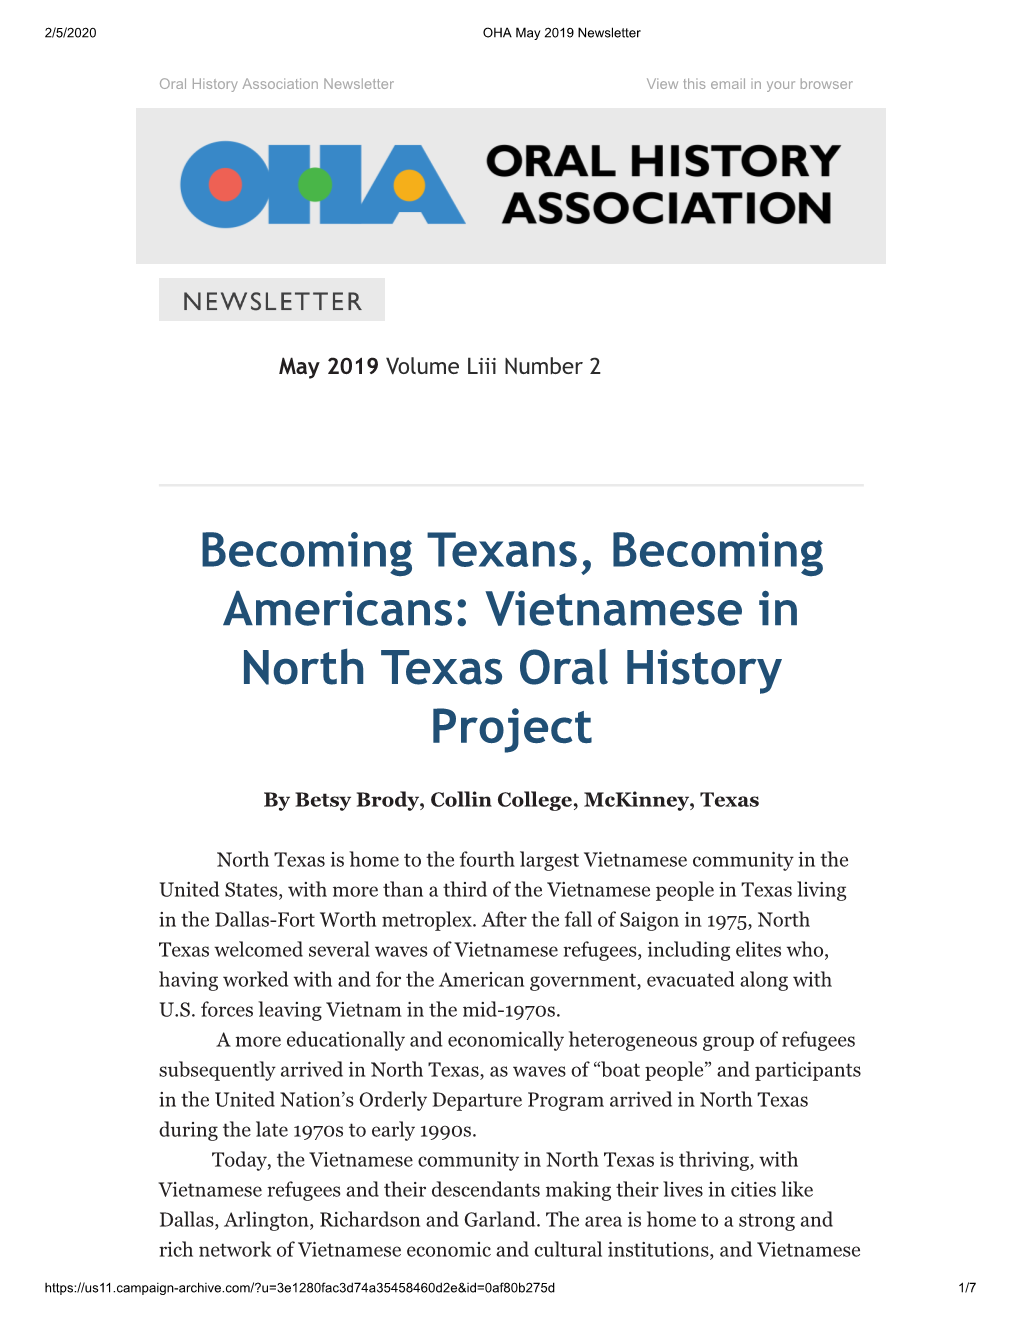 Vietnamese in North Texas Oral History Project